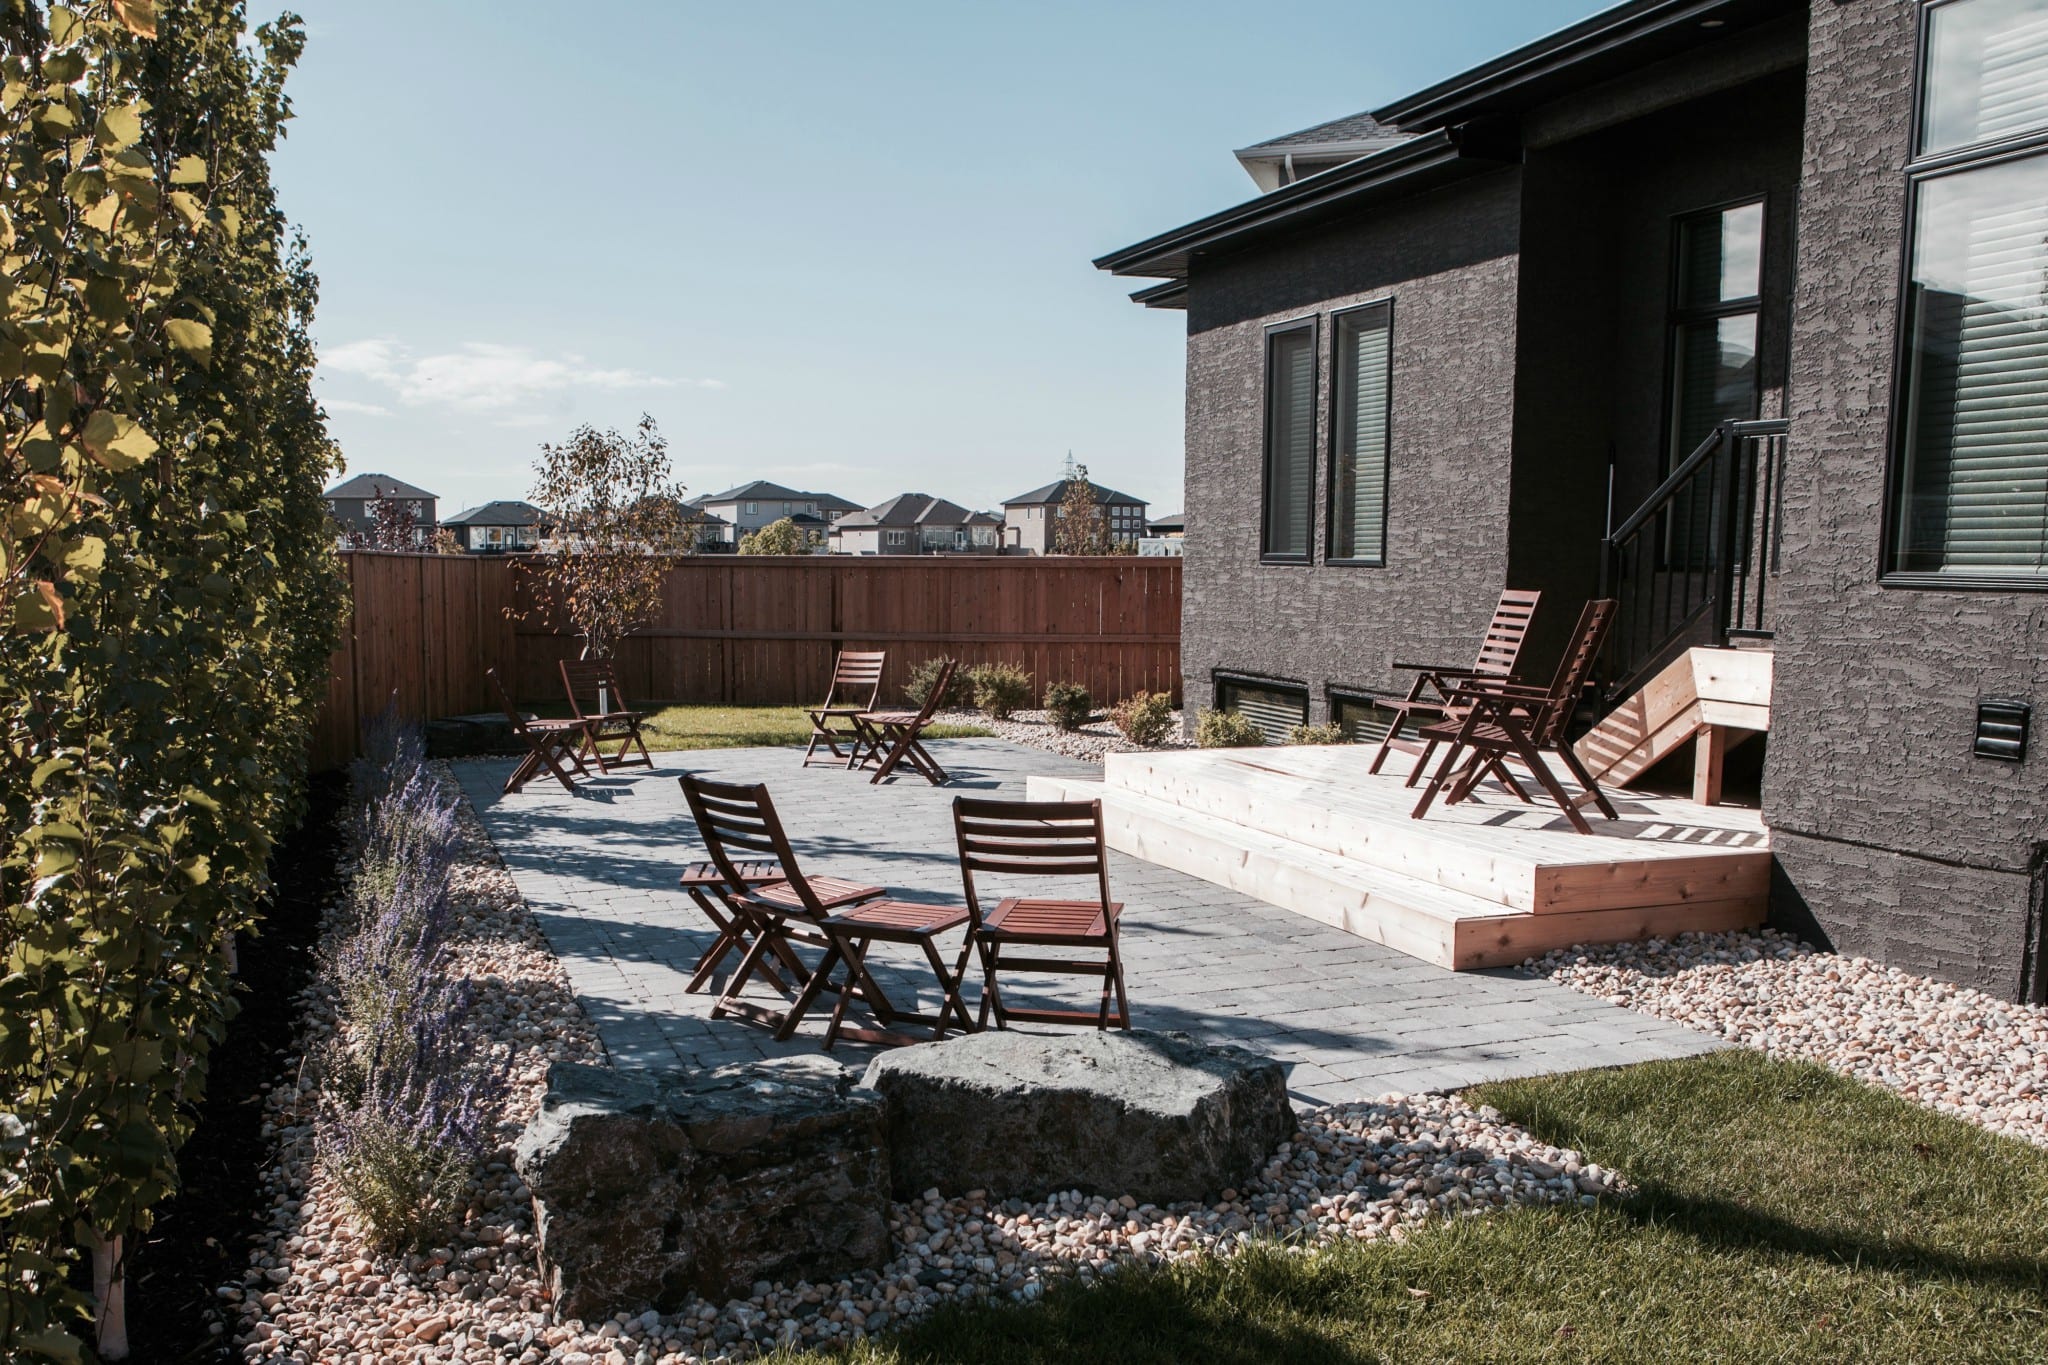 Fully landscaped back yard with a wooden fence, planter beds, rock features, wooden deck and stairs and a brick patio with wooden outdoor furniture.